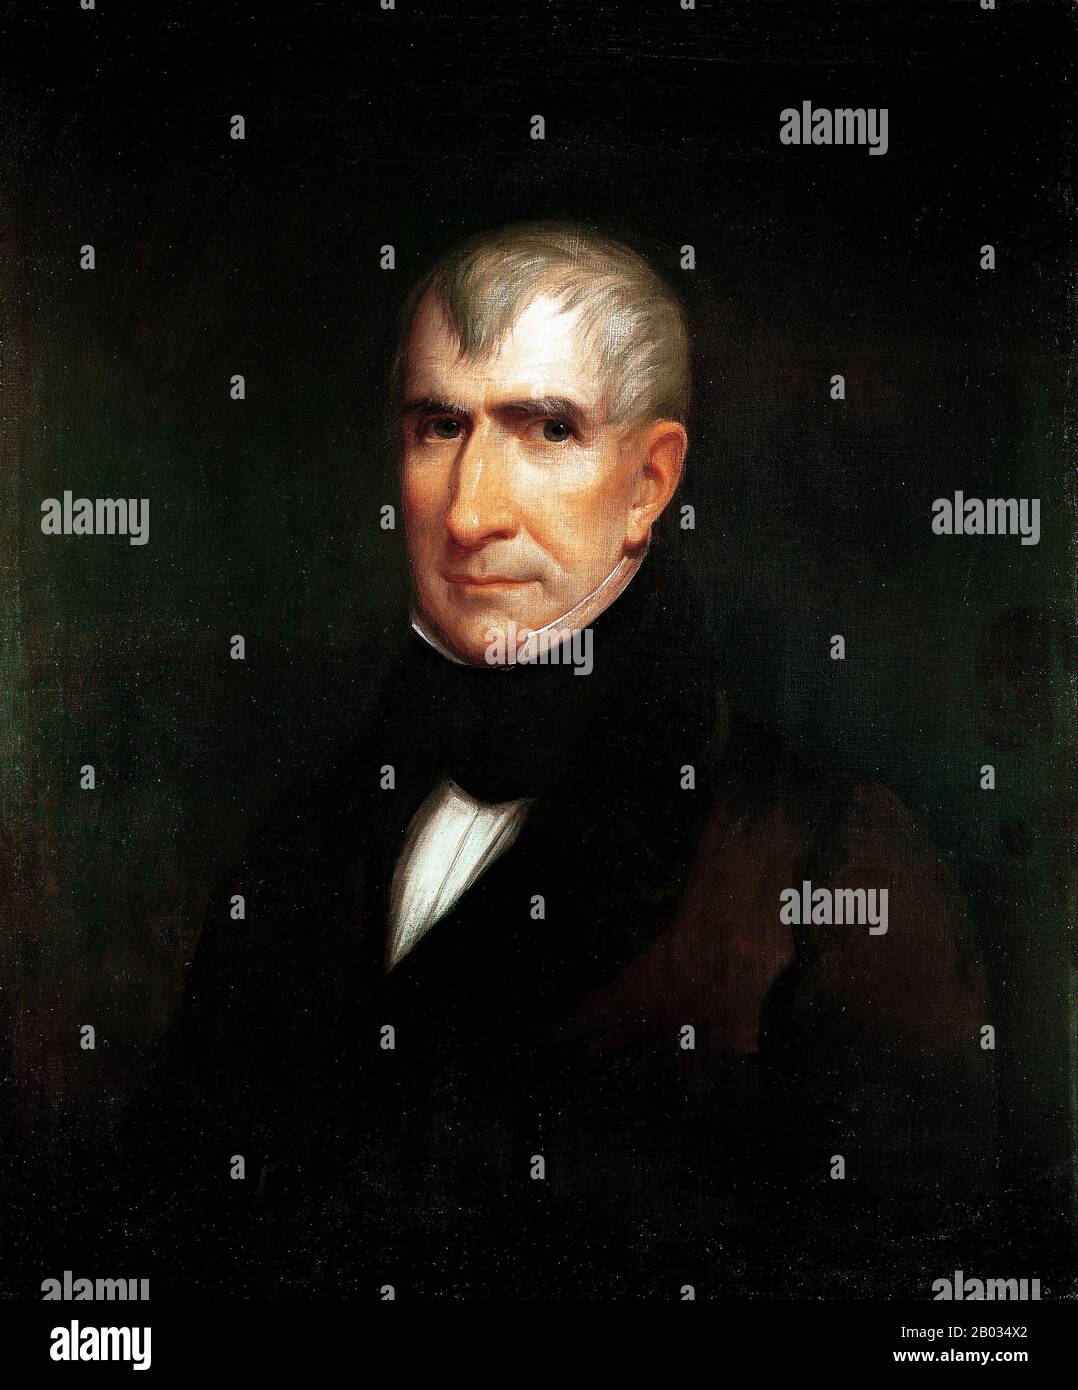 William Henry Harrison (February 9, 1773 – April 4, 1841) was the ninth President of the United States (1841), an American military officer and politician, and the last president born as a British subject. He was also the first president to die in office.  He was 68 years, 23 days old when inaugurated, the oldest president to take office until Ronald Reagan in 1981. Harrison died on his 32nd day in office of complications from pneumonia, serving the shortest tenure in United States presidential history. Stock Photo